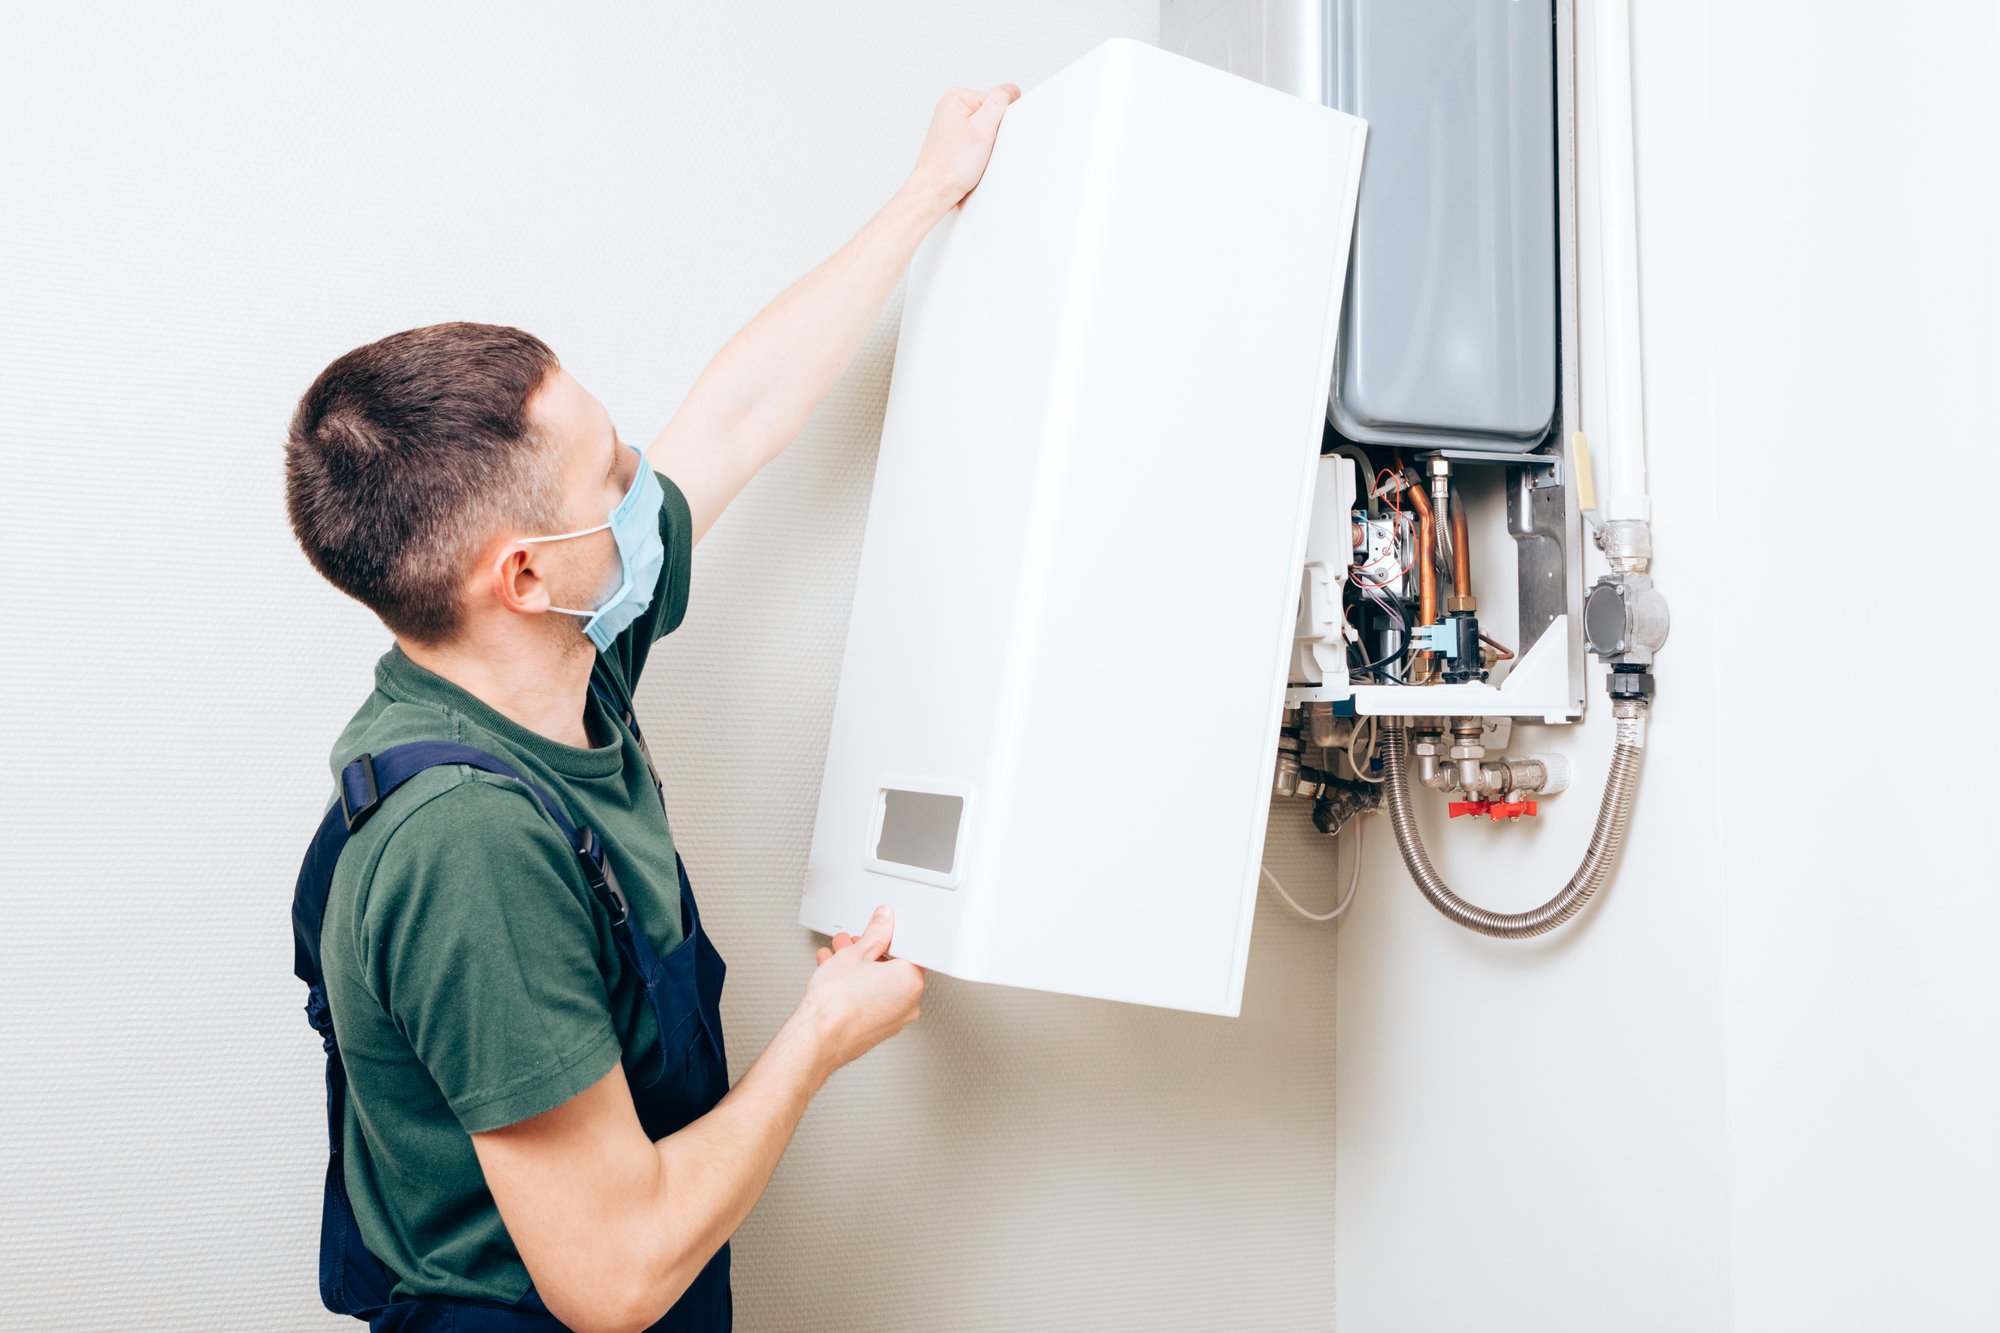 Find Out What A Professional Has To Say On The Boiler Installation